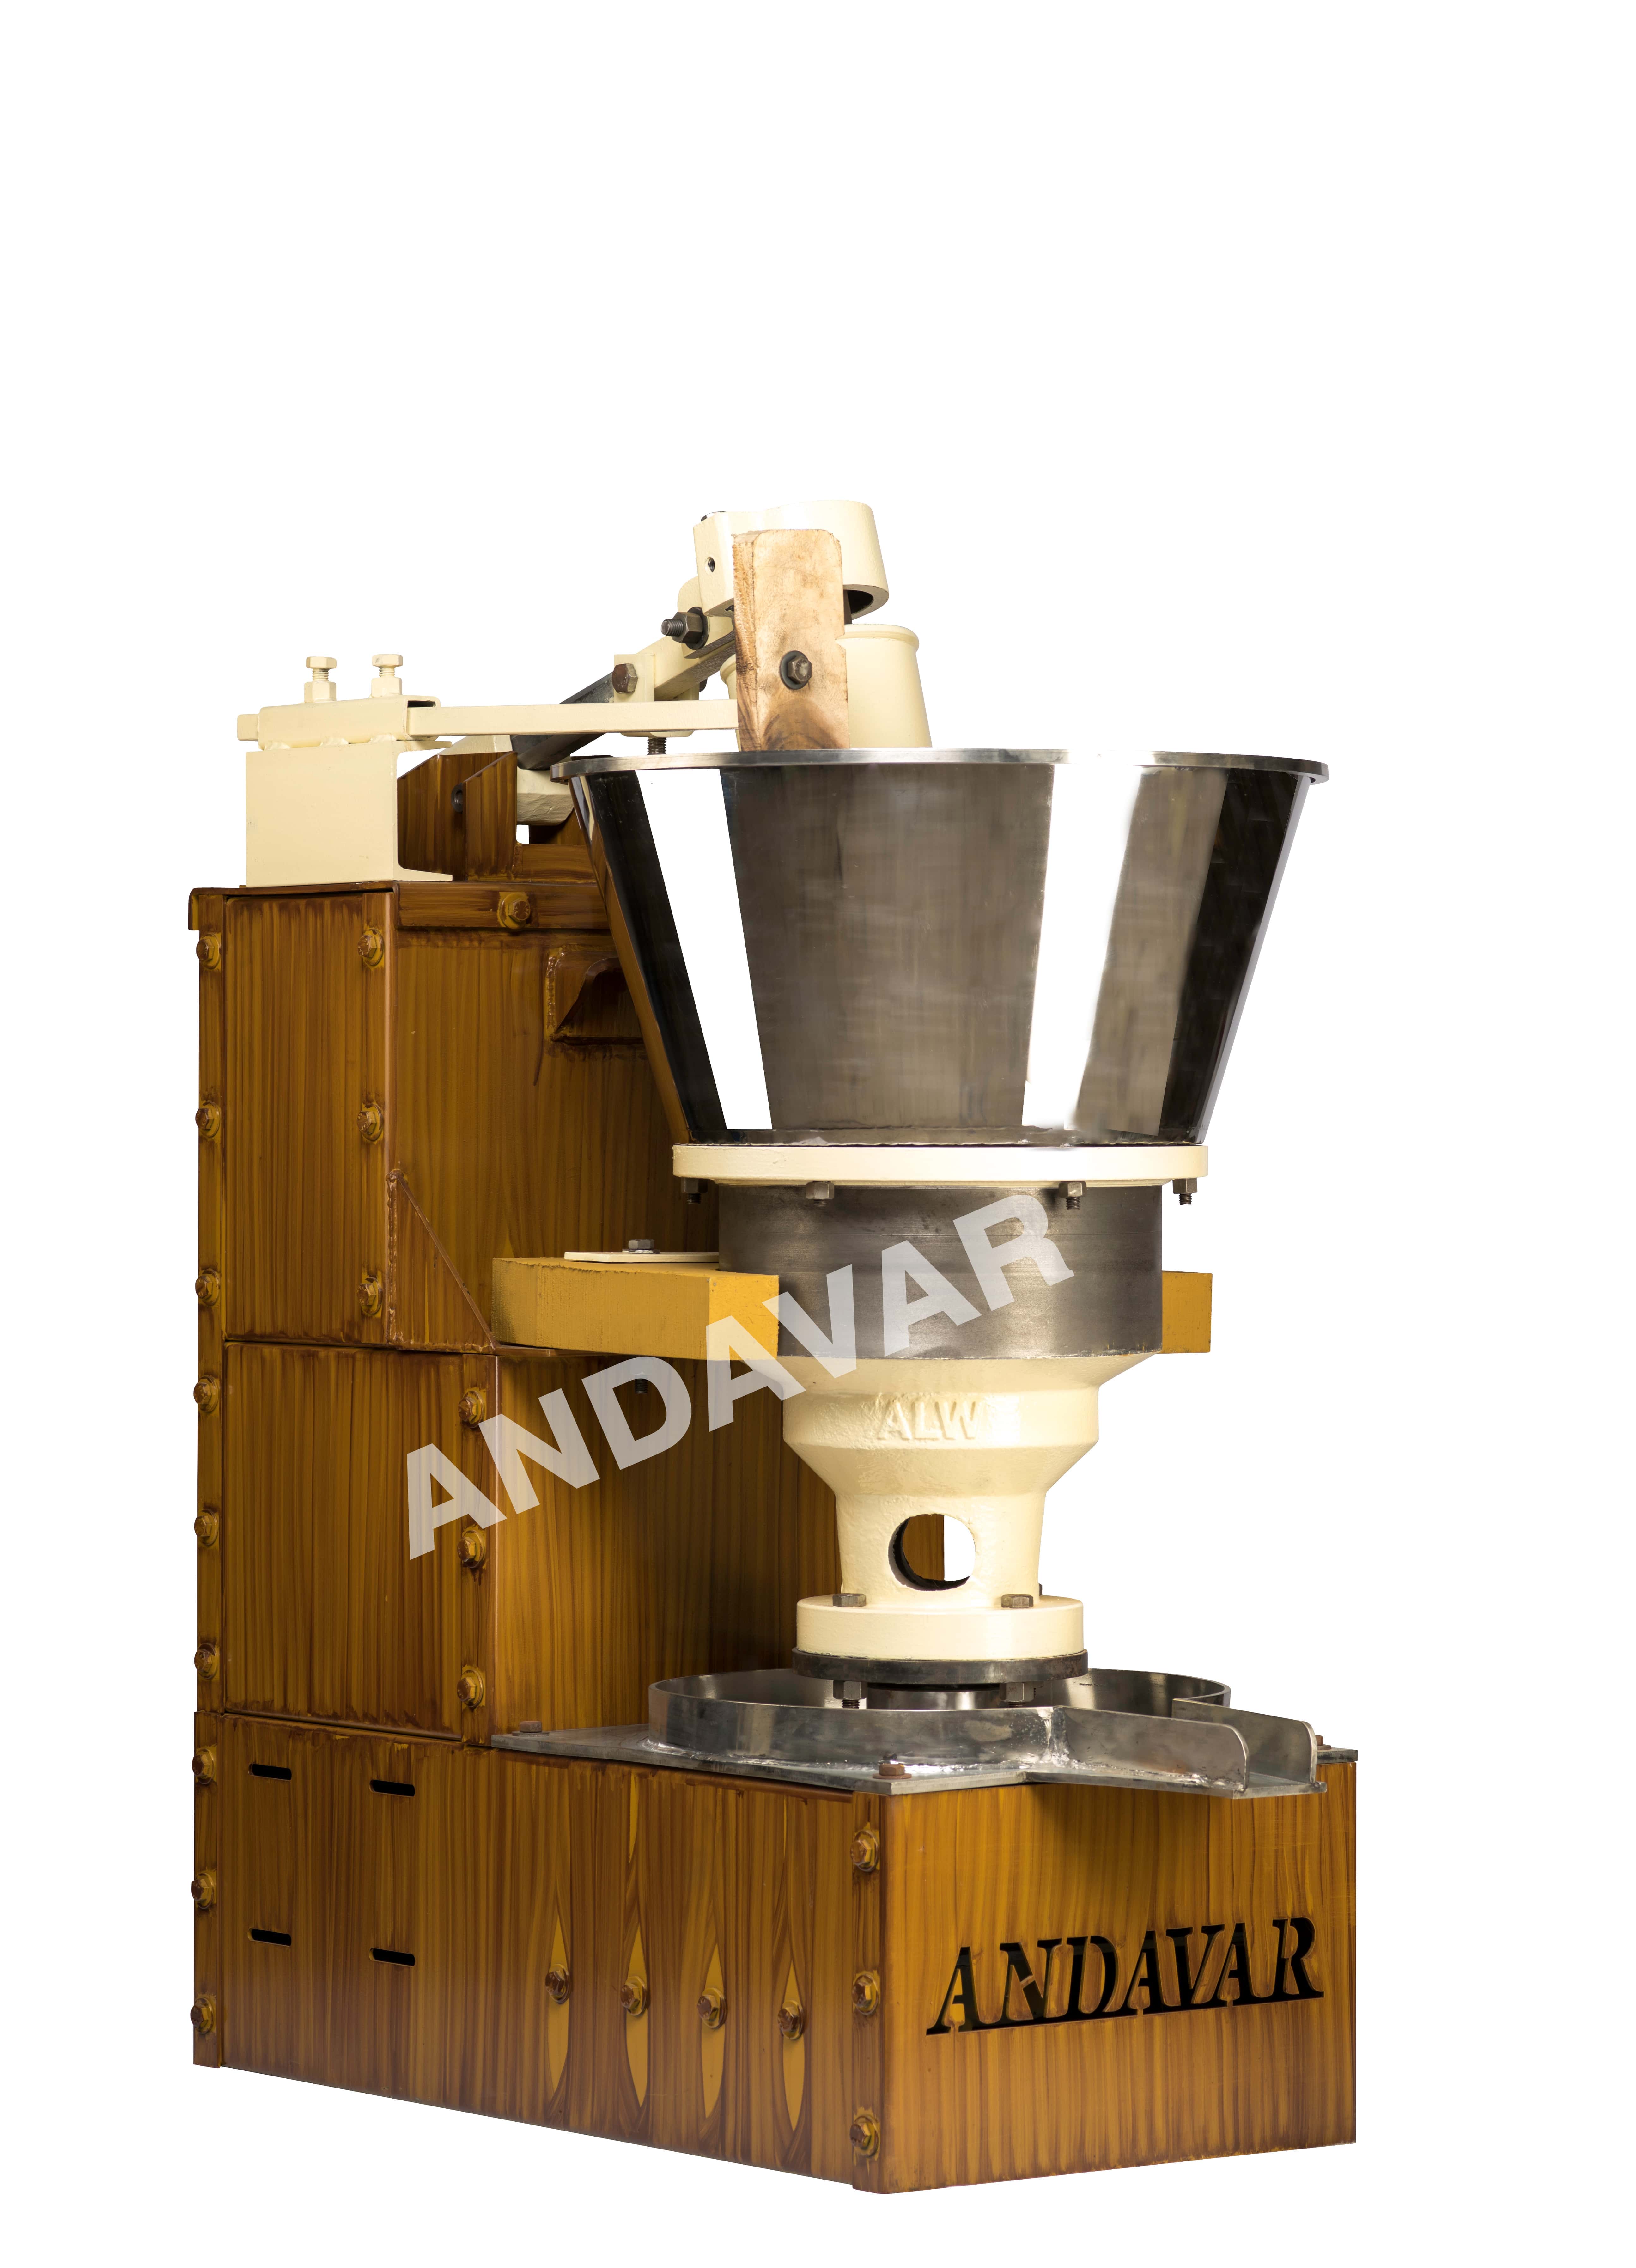 ANDAVAR LATHE WORKS OIL EXTRACTION MACHINE MANUFACTURERS - Tamil Nadu - Erode ID1534011